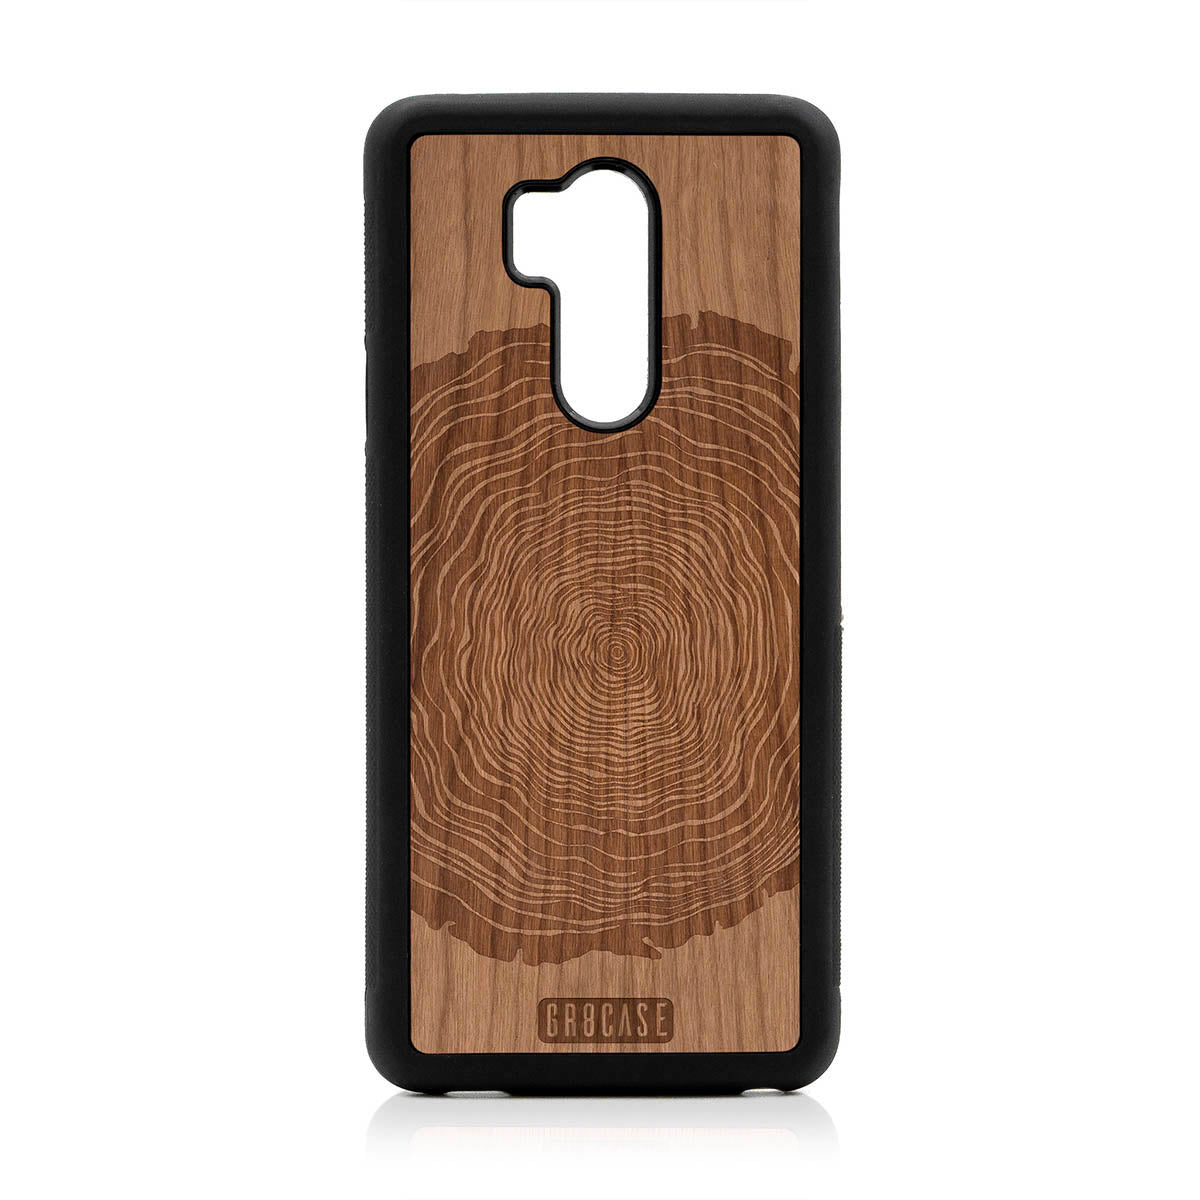 Tree Rings Design Wood Case For LG G7 ThinQ